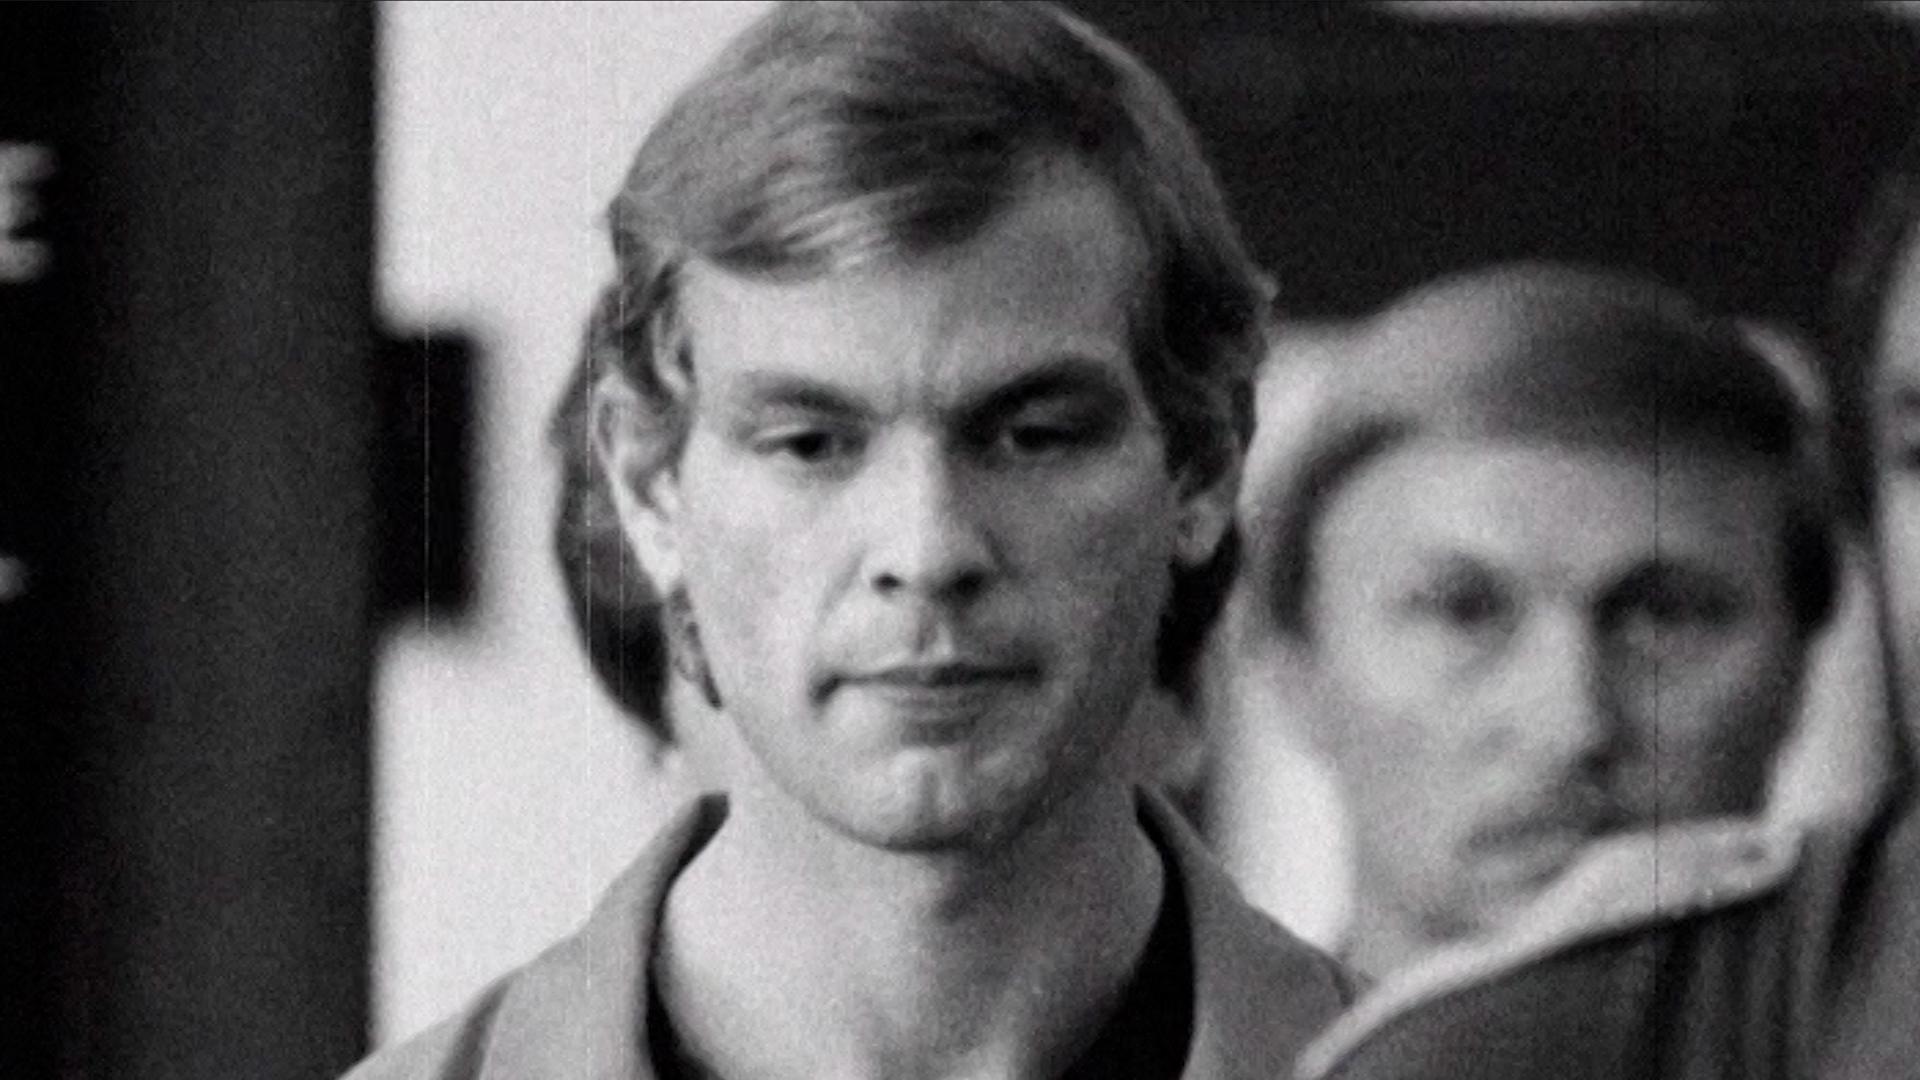 Jeffrey Dahmer raped and murdered 17 men and boys from 1978 through 1991.